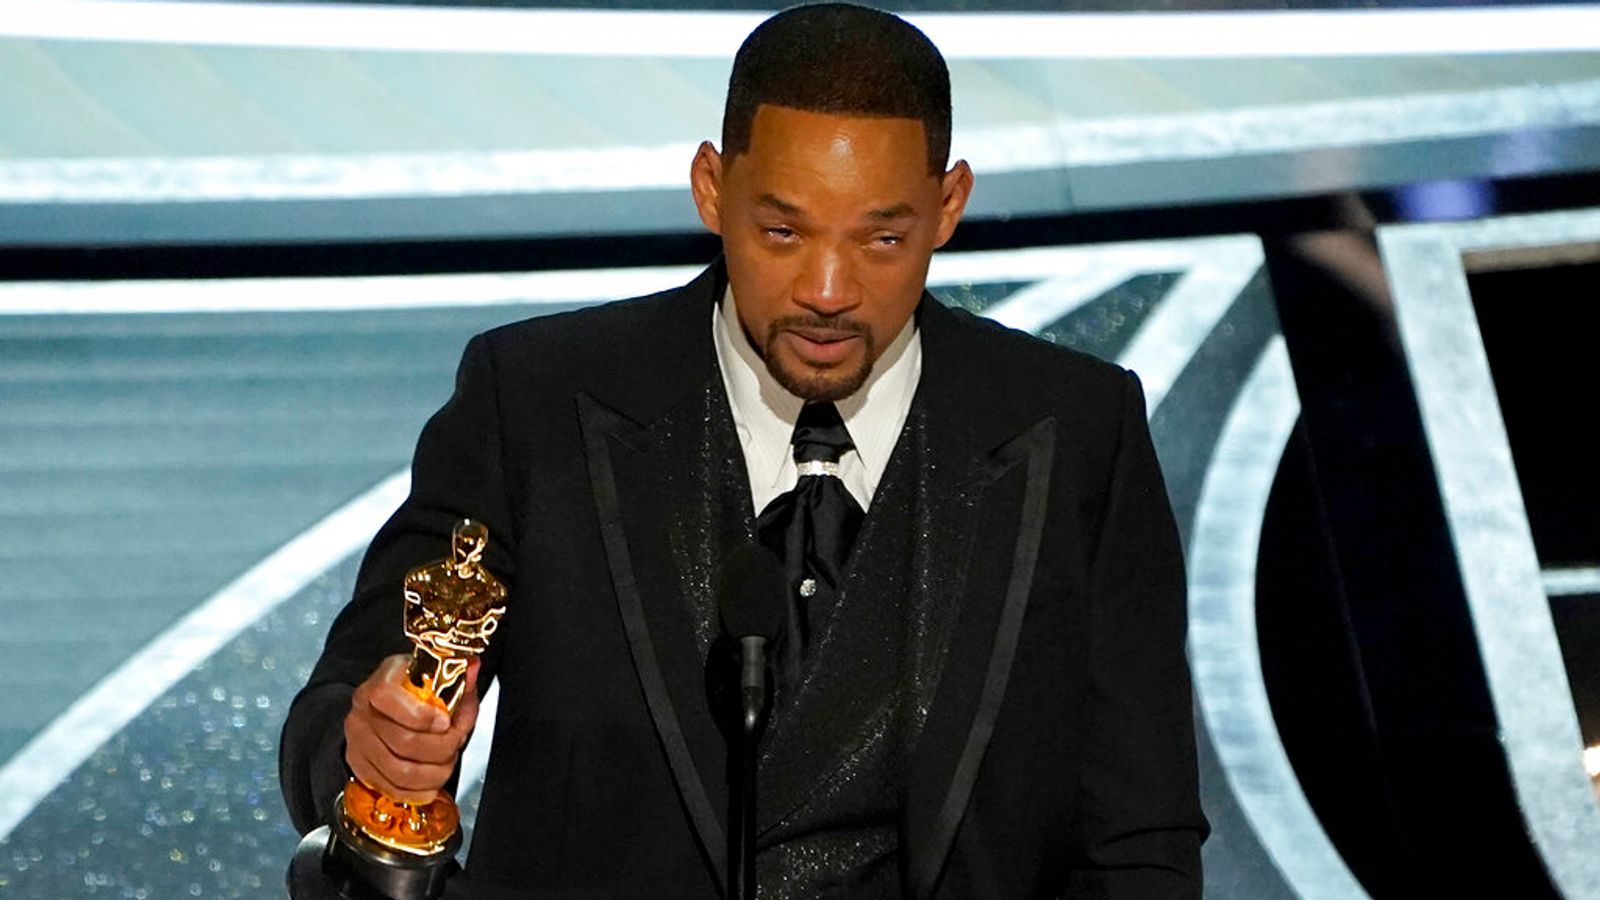 Will Smith's Emancipation to enter 2023 Oscar race - just months after Chris Rock slap